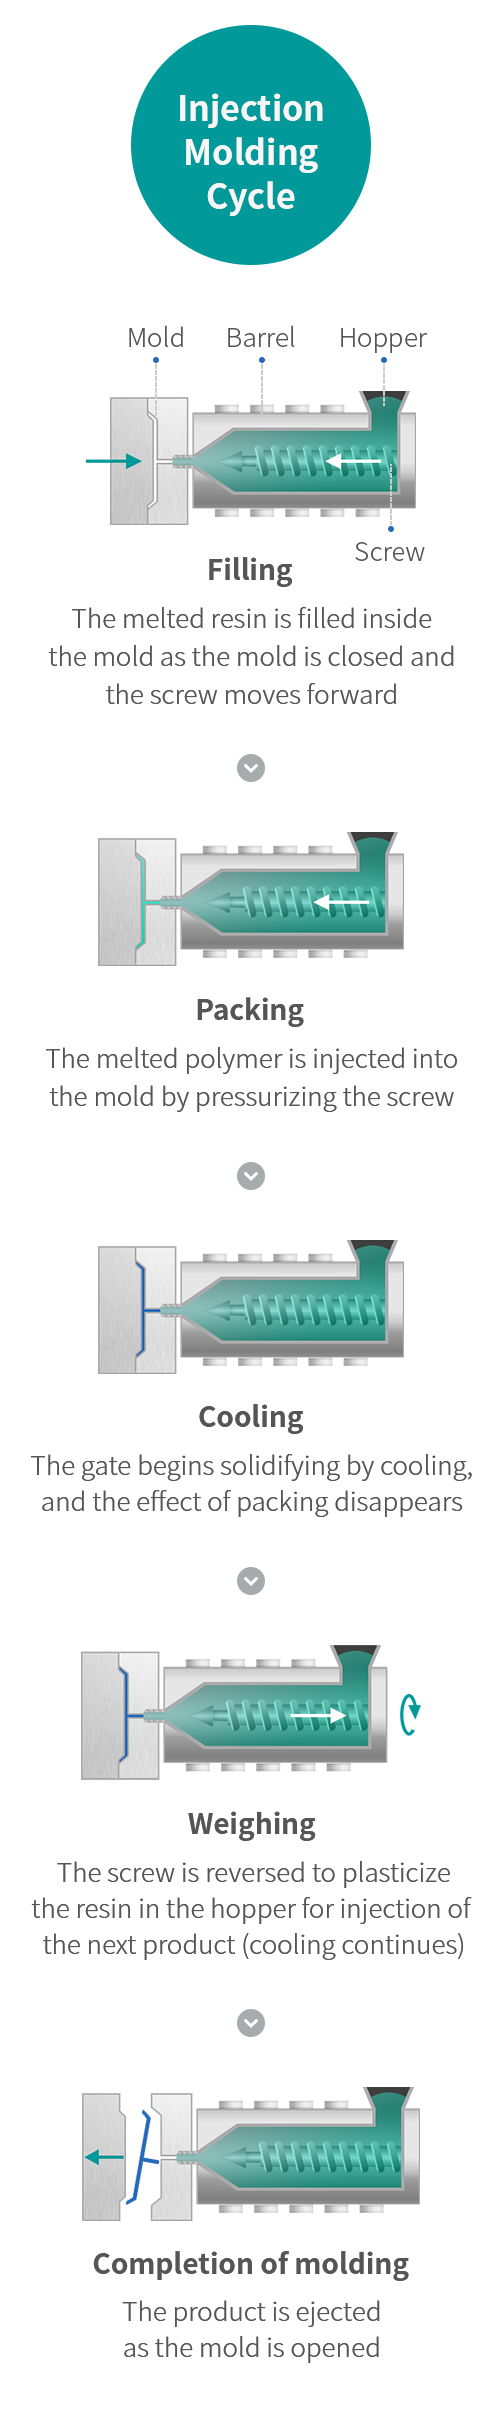 Injection molding Cycle